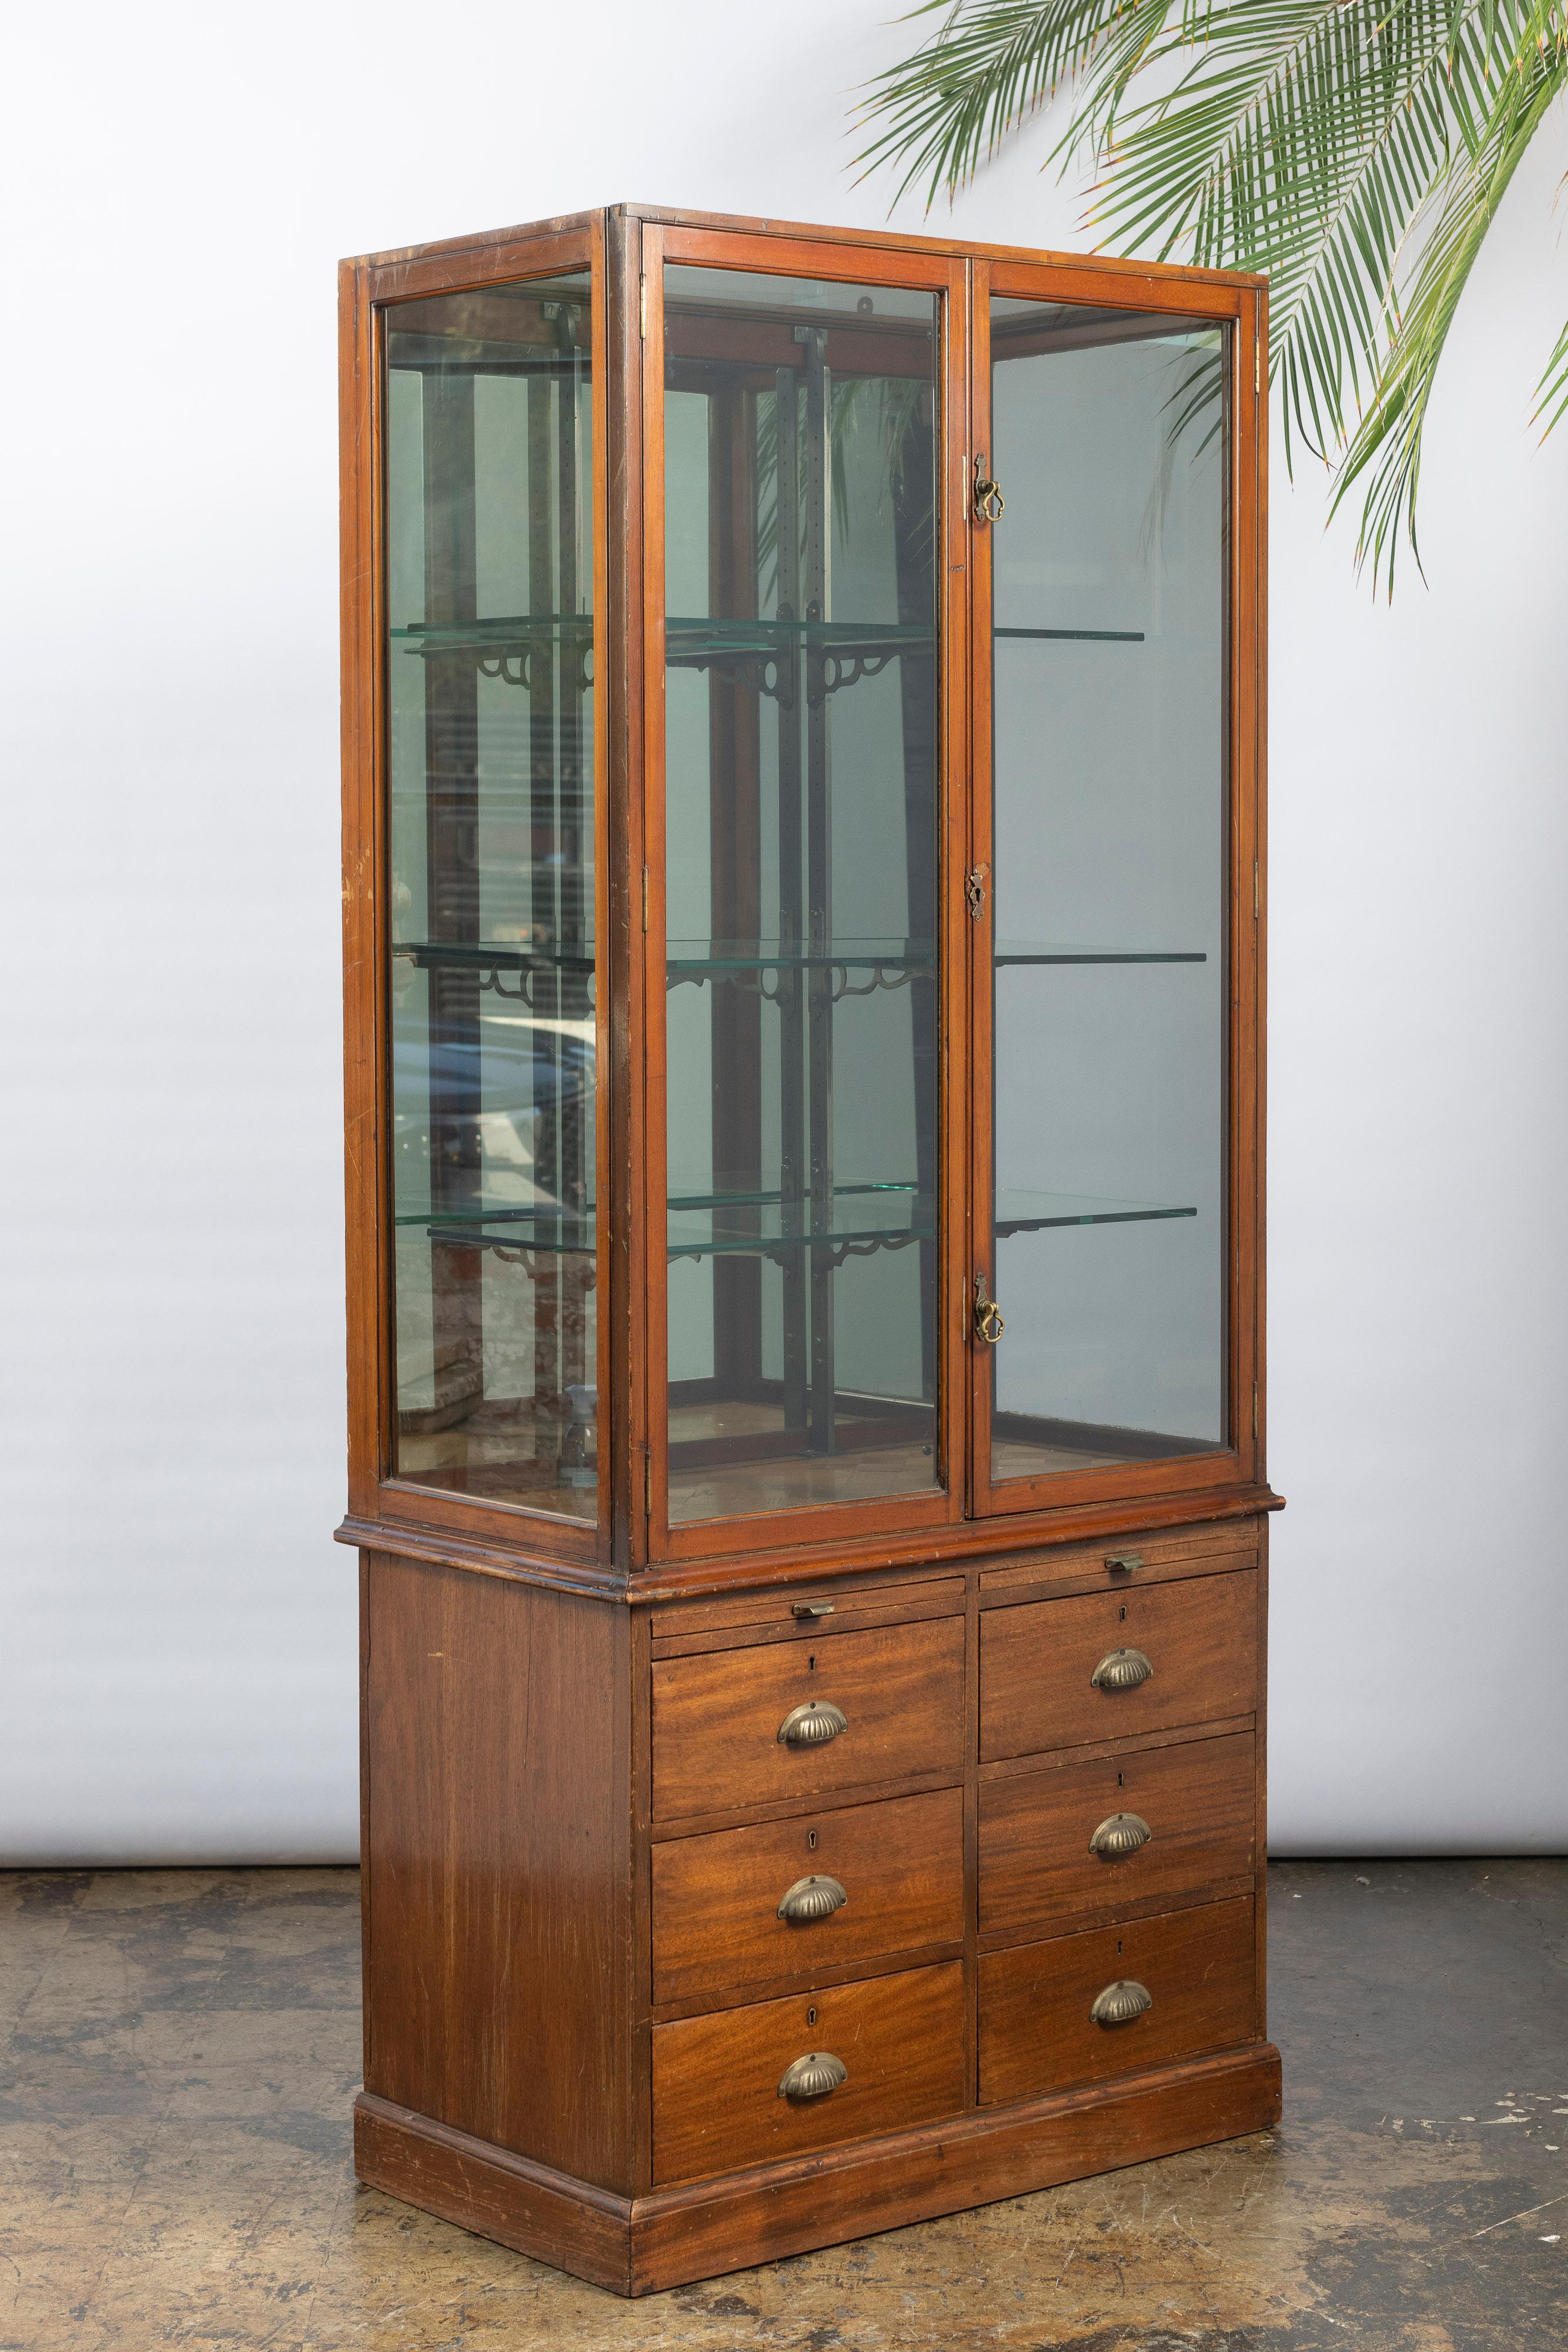 20th Century Antique English Haberdashery or Apothecary Cabinet, with Wood and Glass For Sale